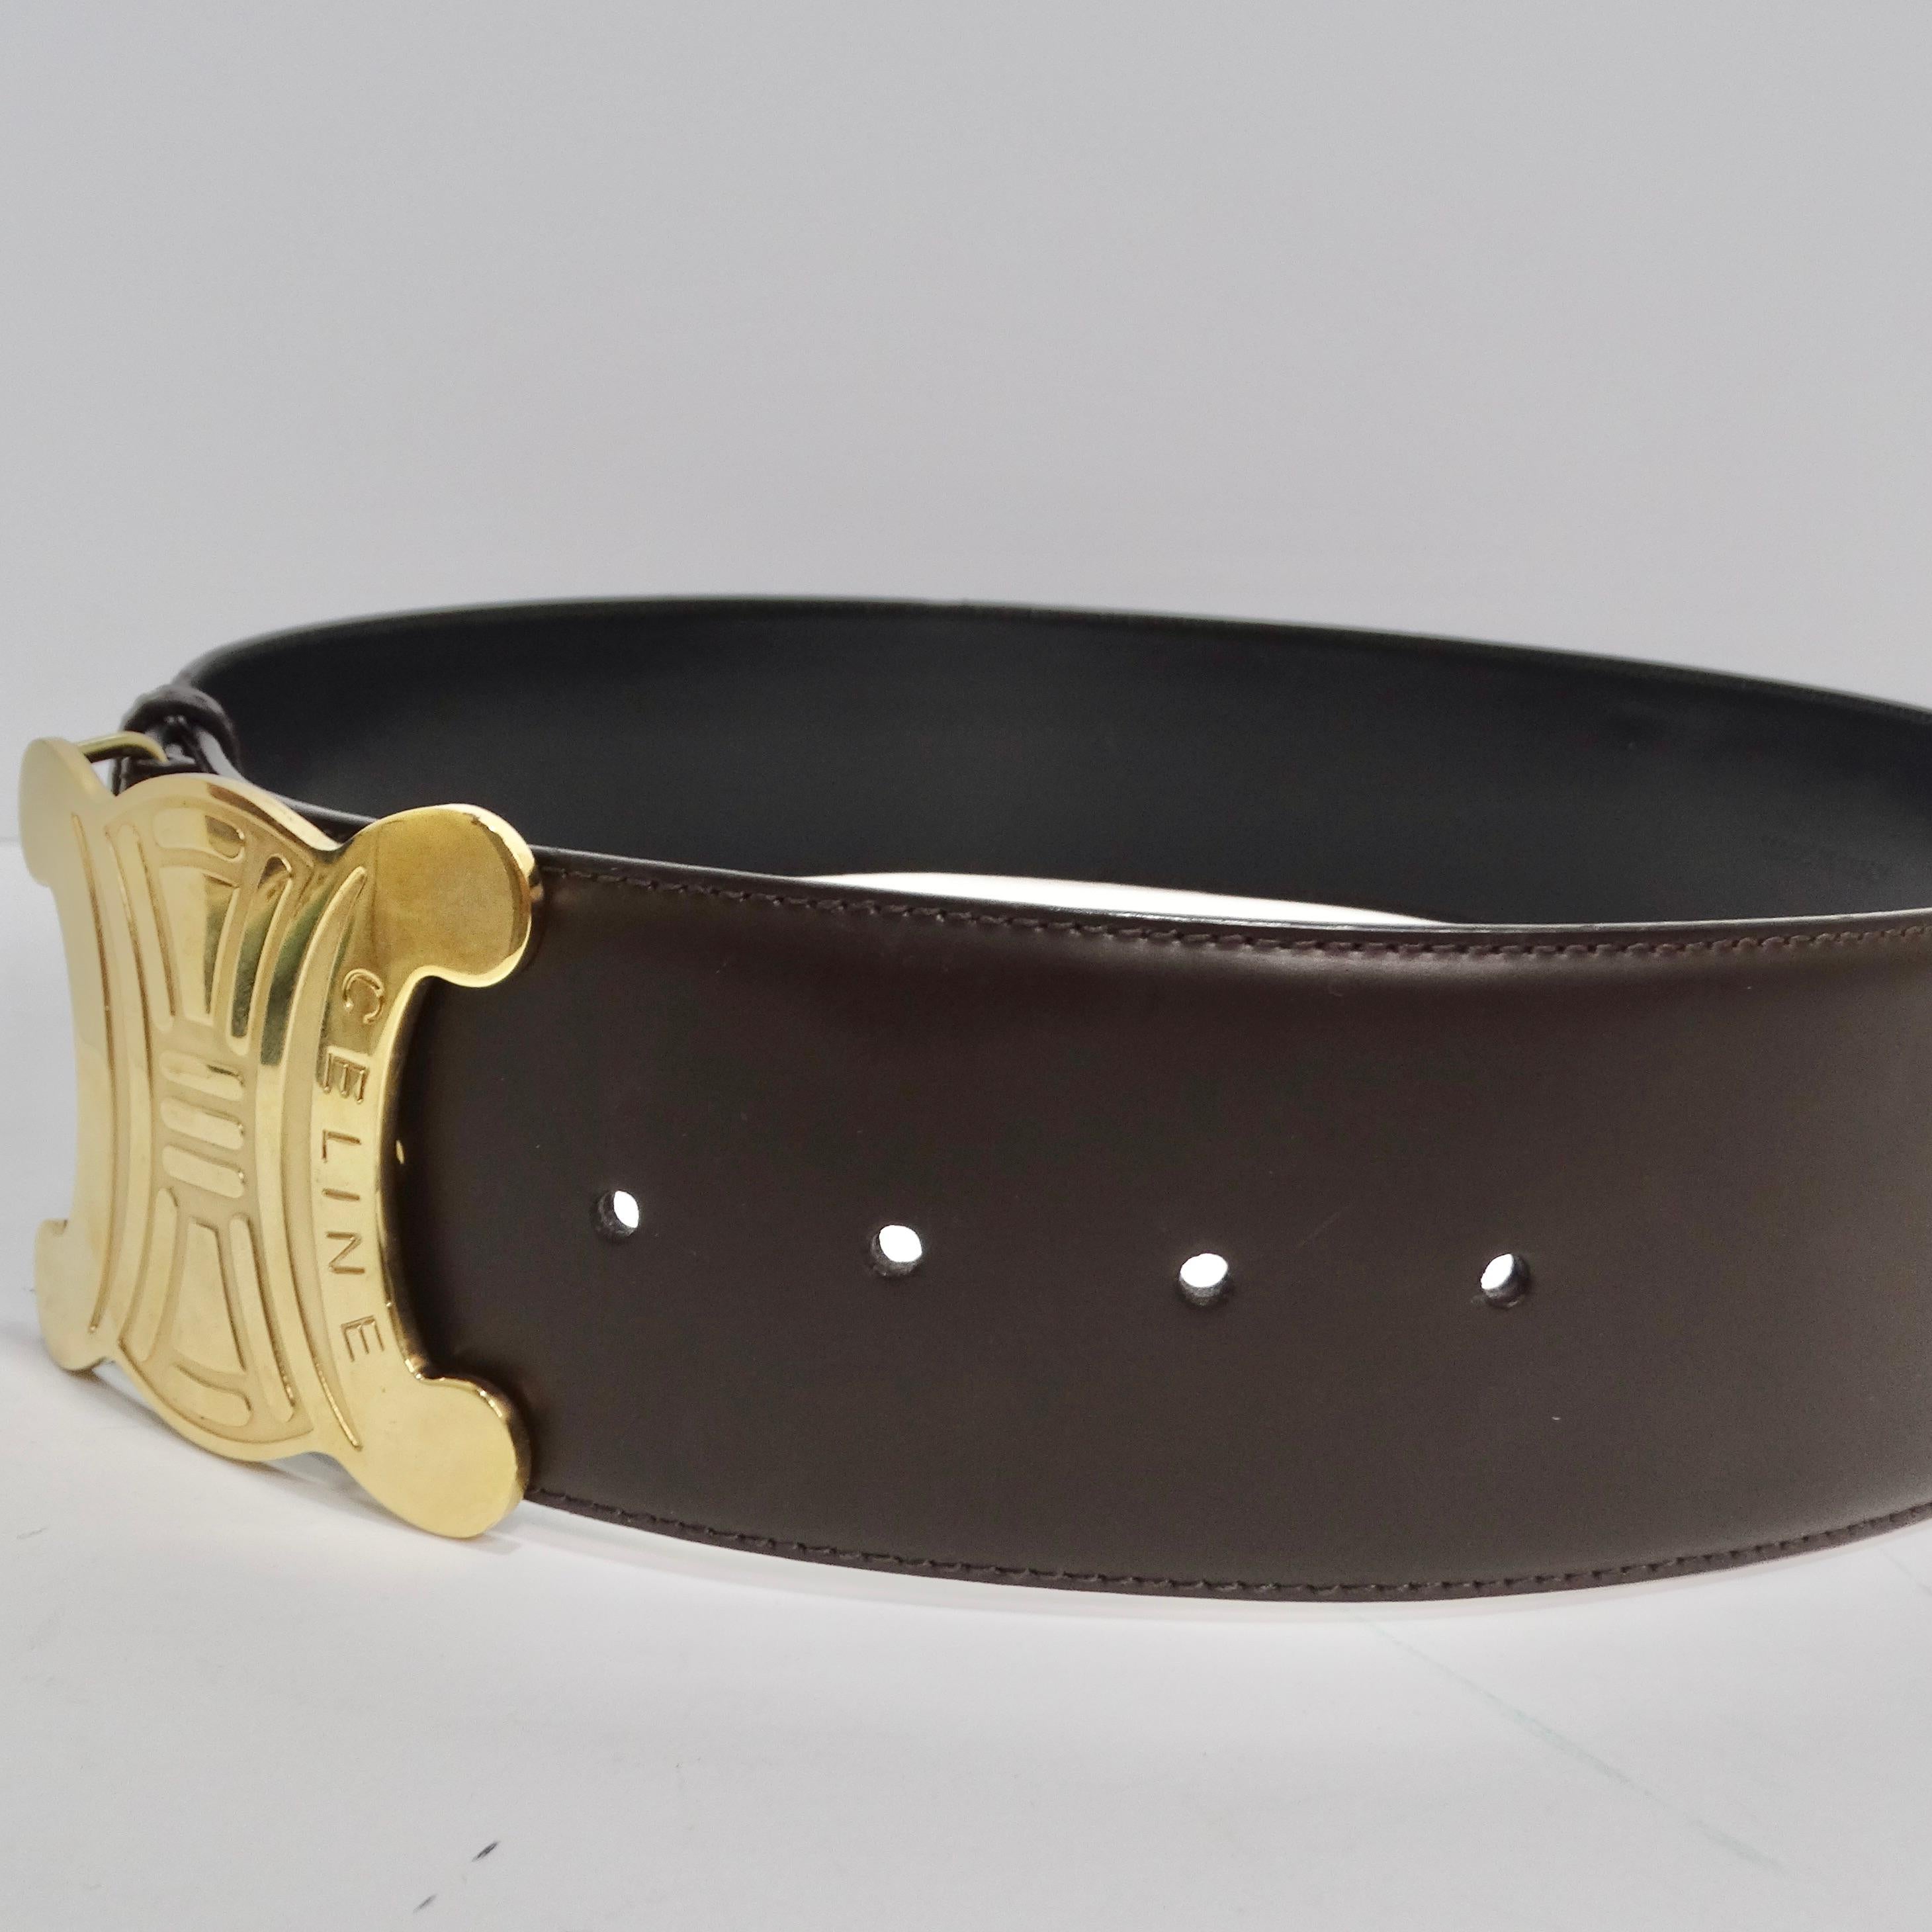 Celine 1990s Brown Leather Gold Tone Belt In Good Condition For Sale In Scottsdale, AZ